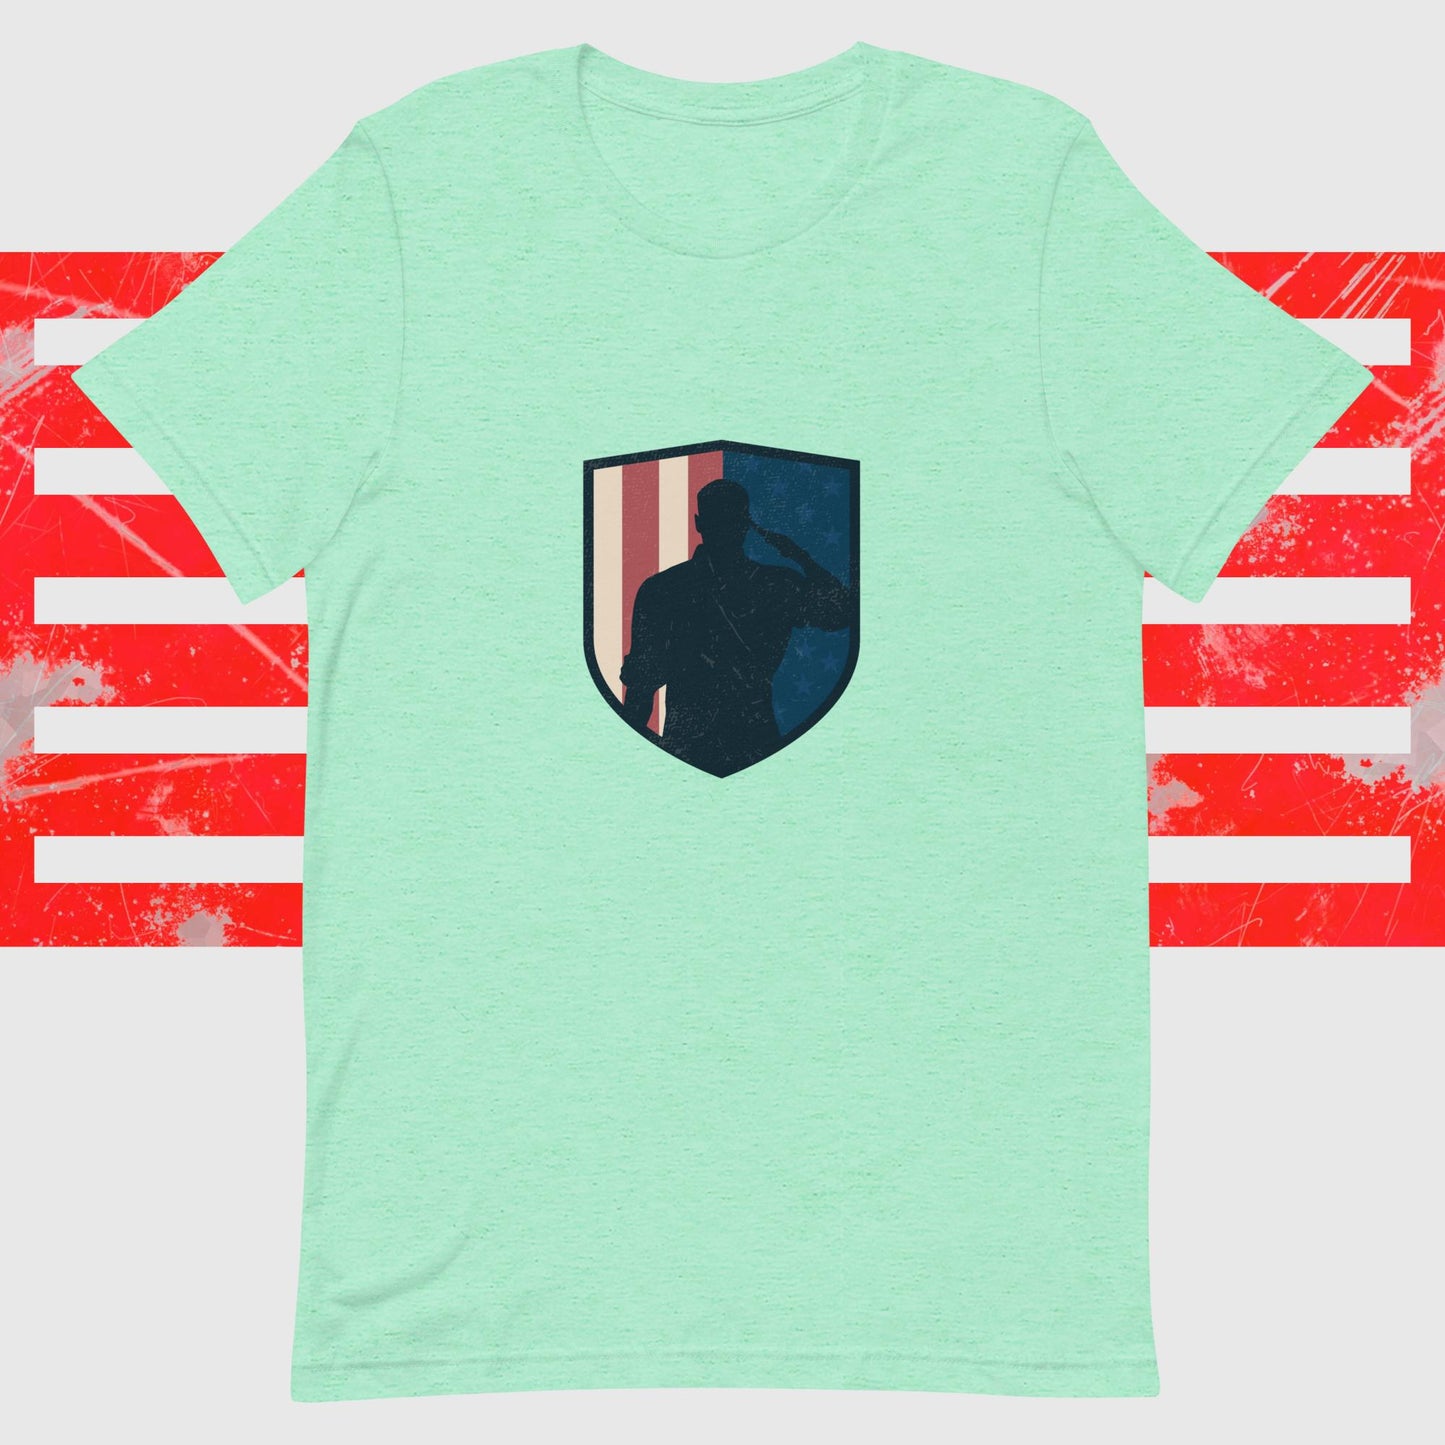 PATRIOTIC T-SHIRT AMERICAN SOLDIER LOGO MINT FRONT - www.firstamericanstore.com